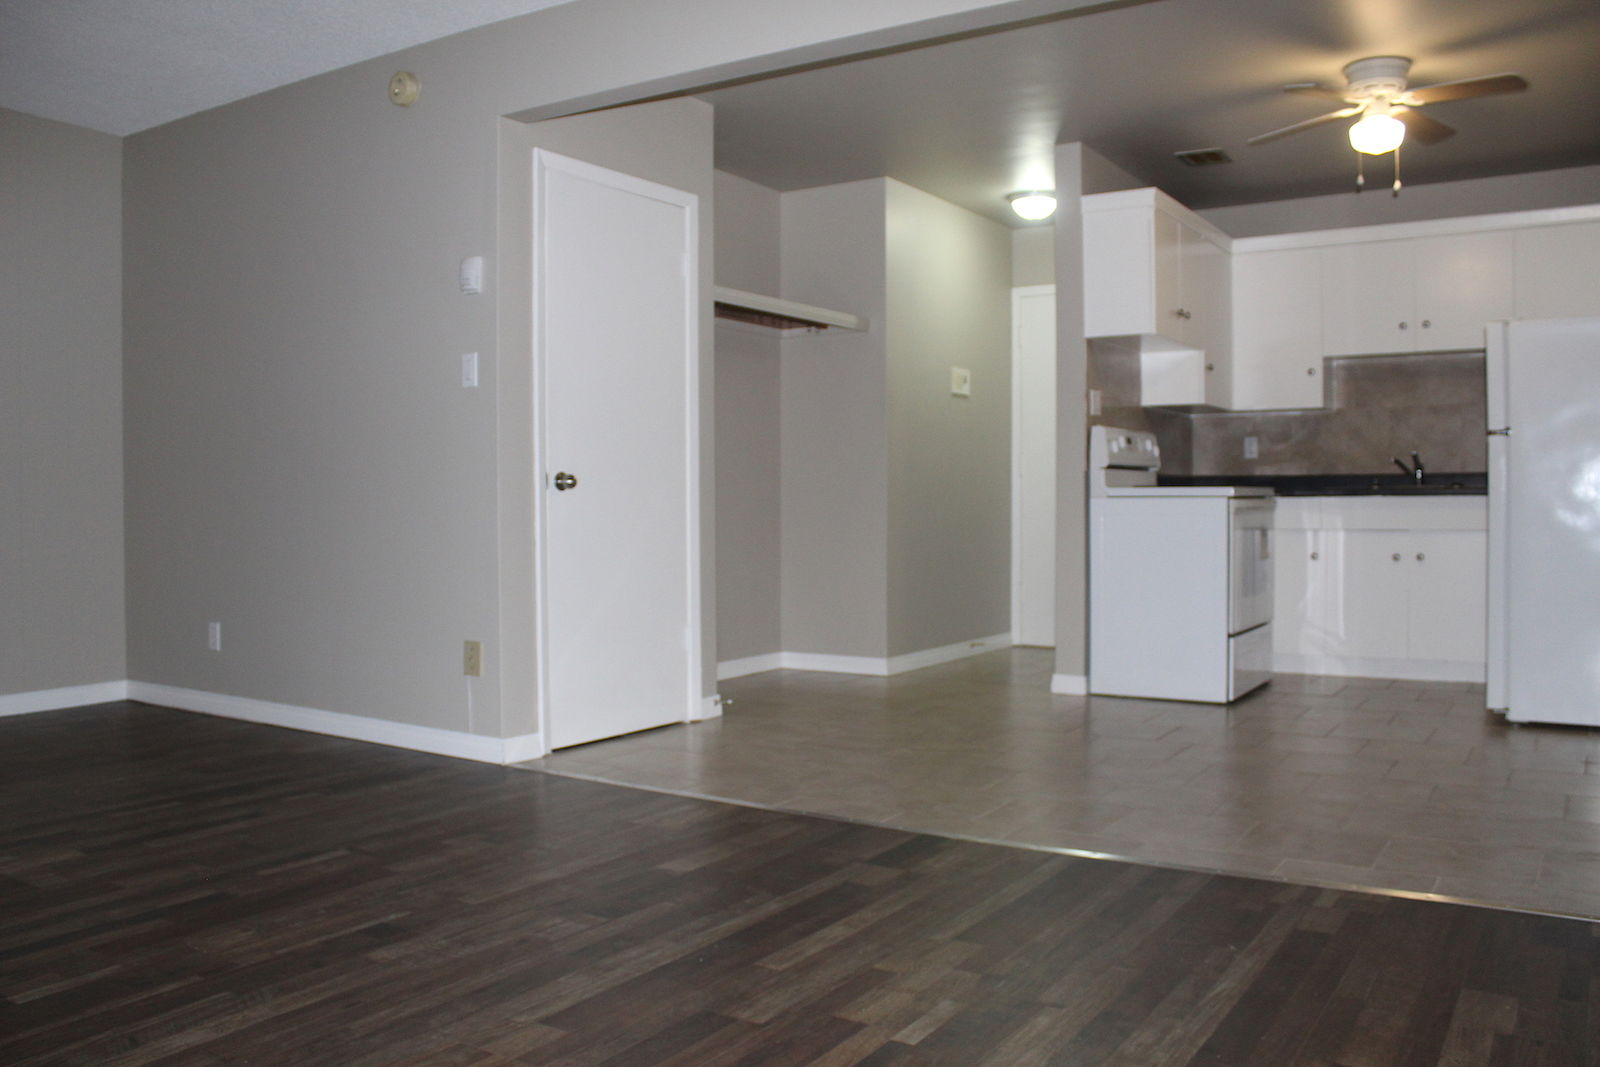 Edmonton Pet Friendly Apartment For Rent Oliver Oliver 1 Apartments Id 289352 Rentfaster Ca